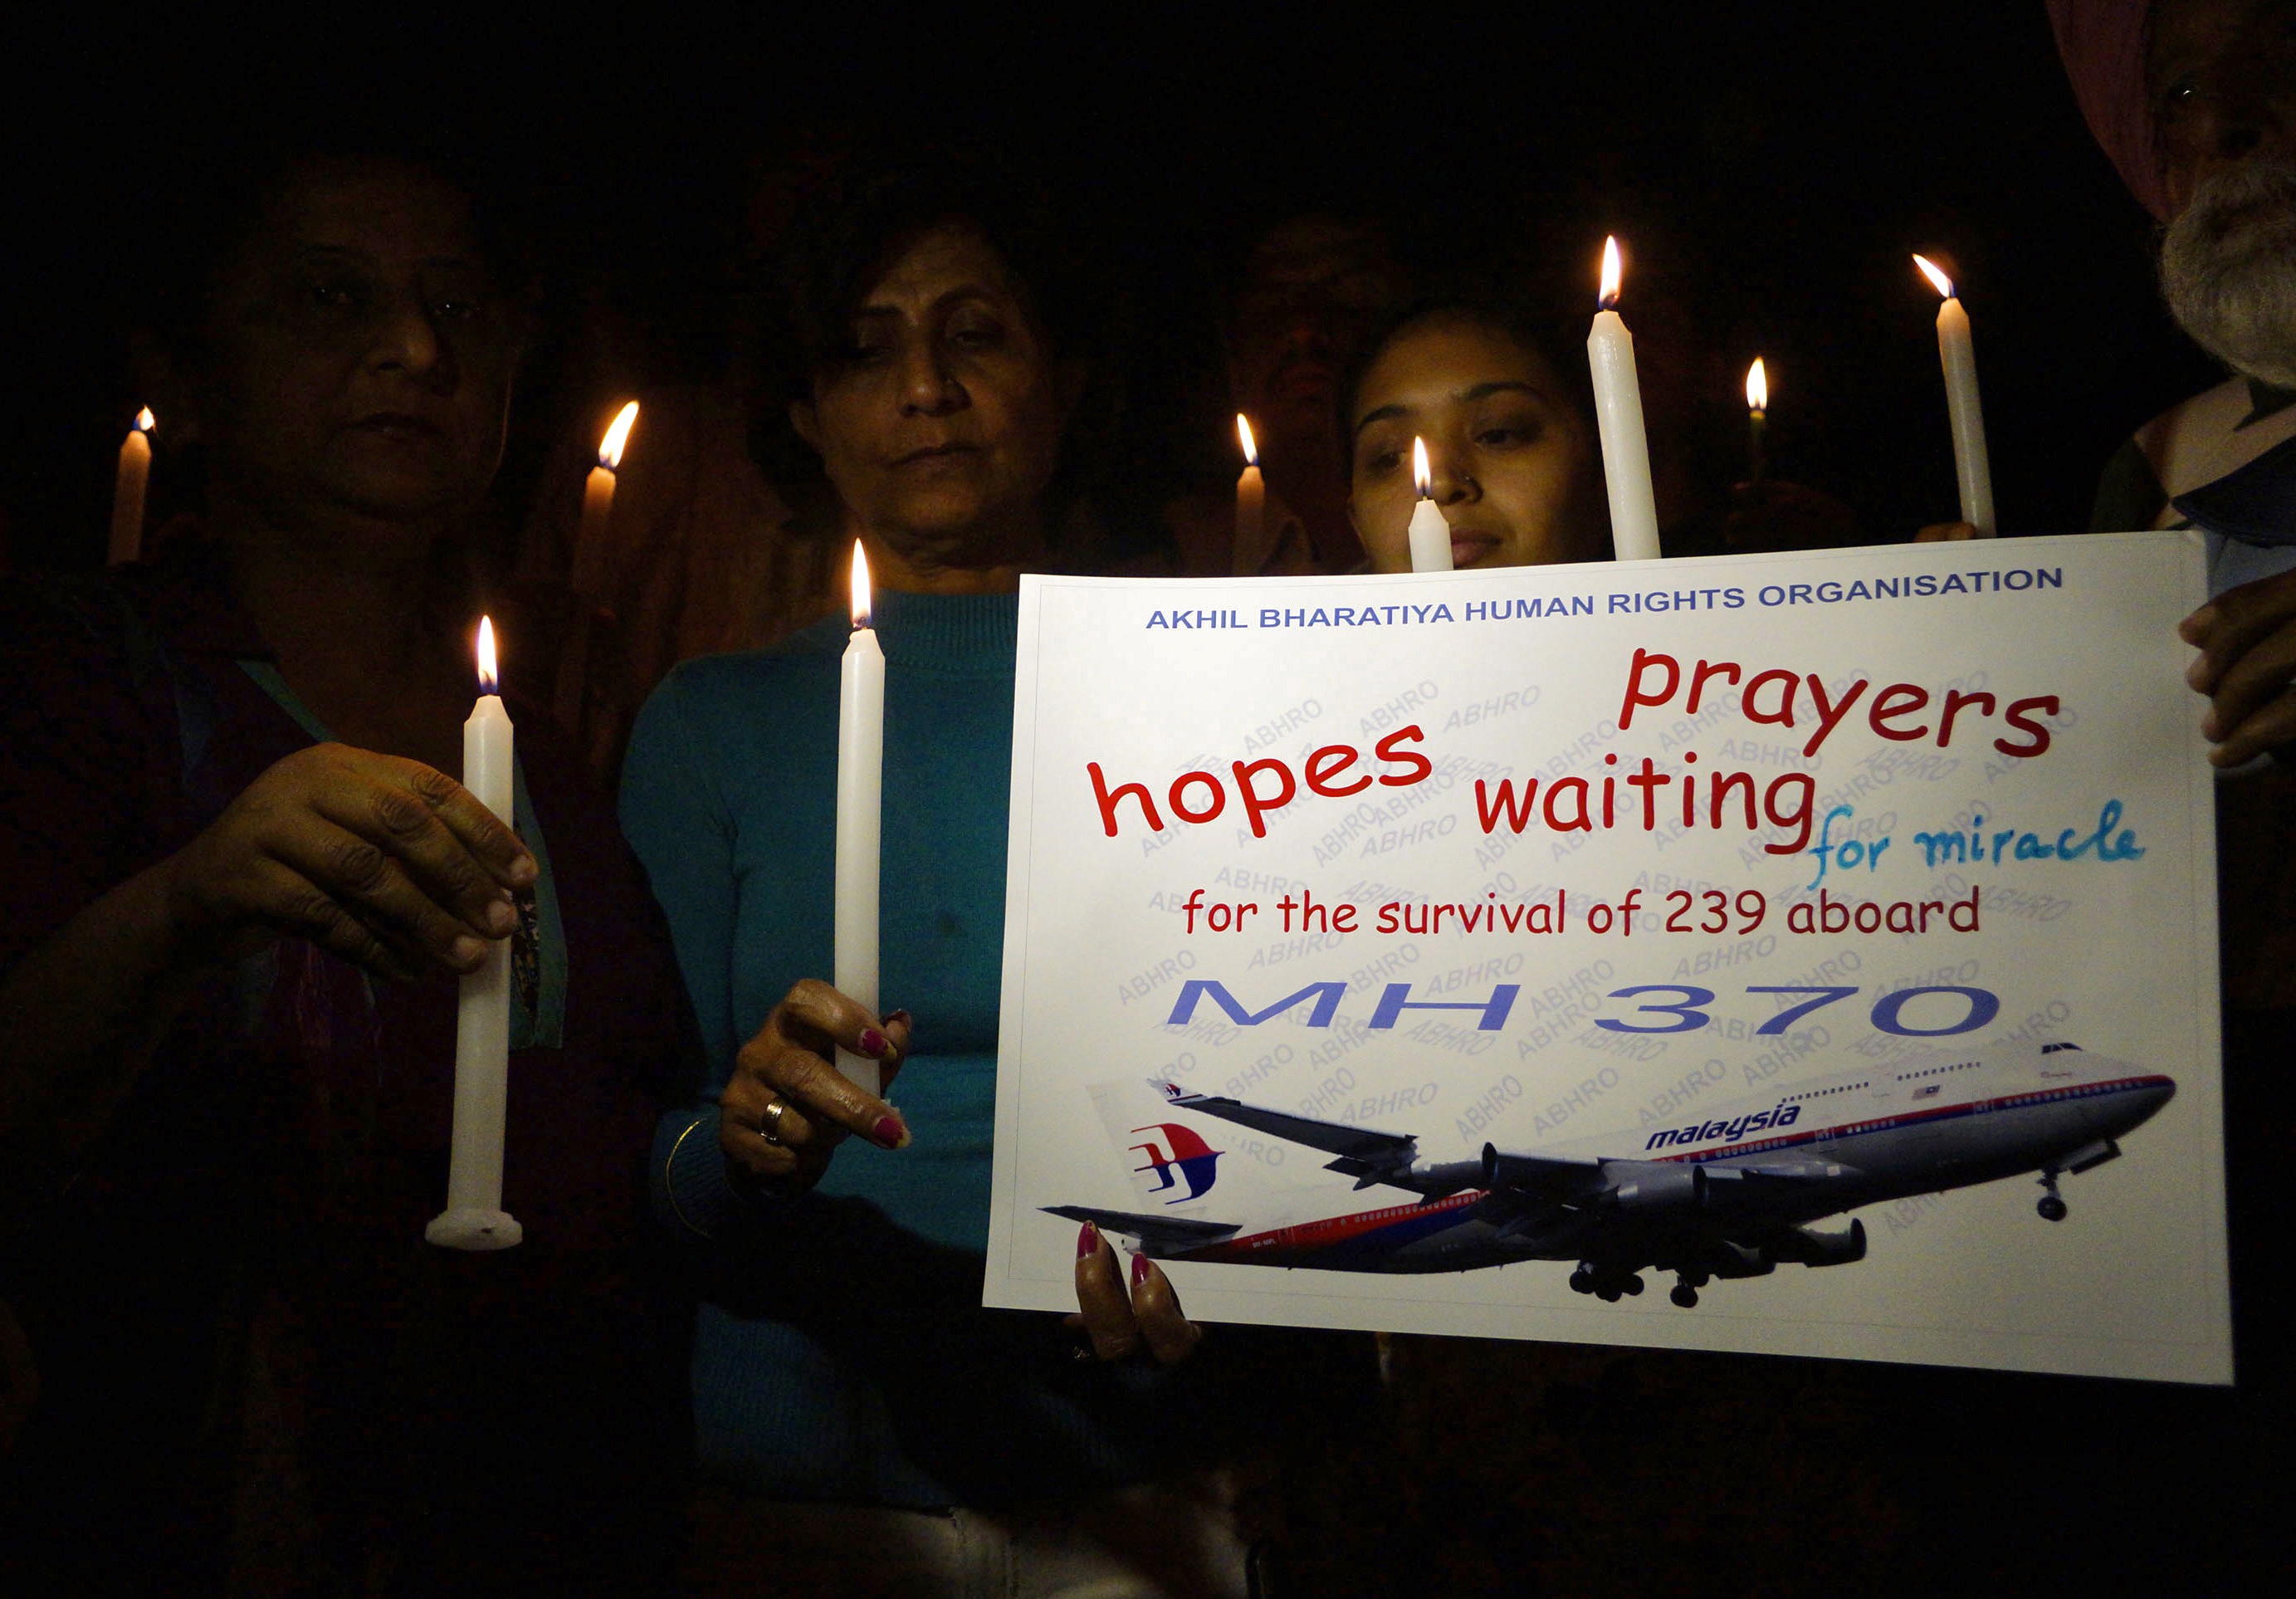 India tells Malaysia found no sign of missing jet - sources